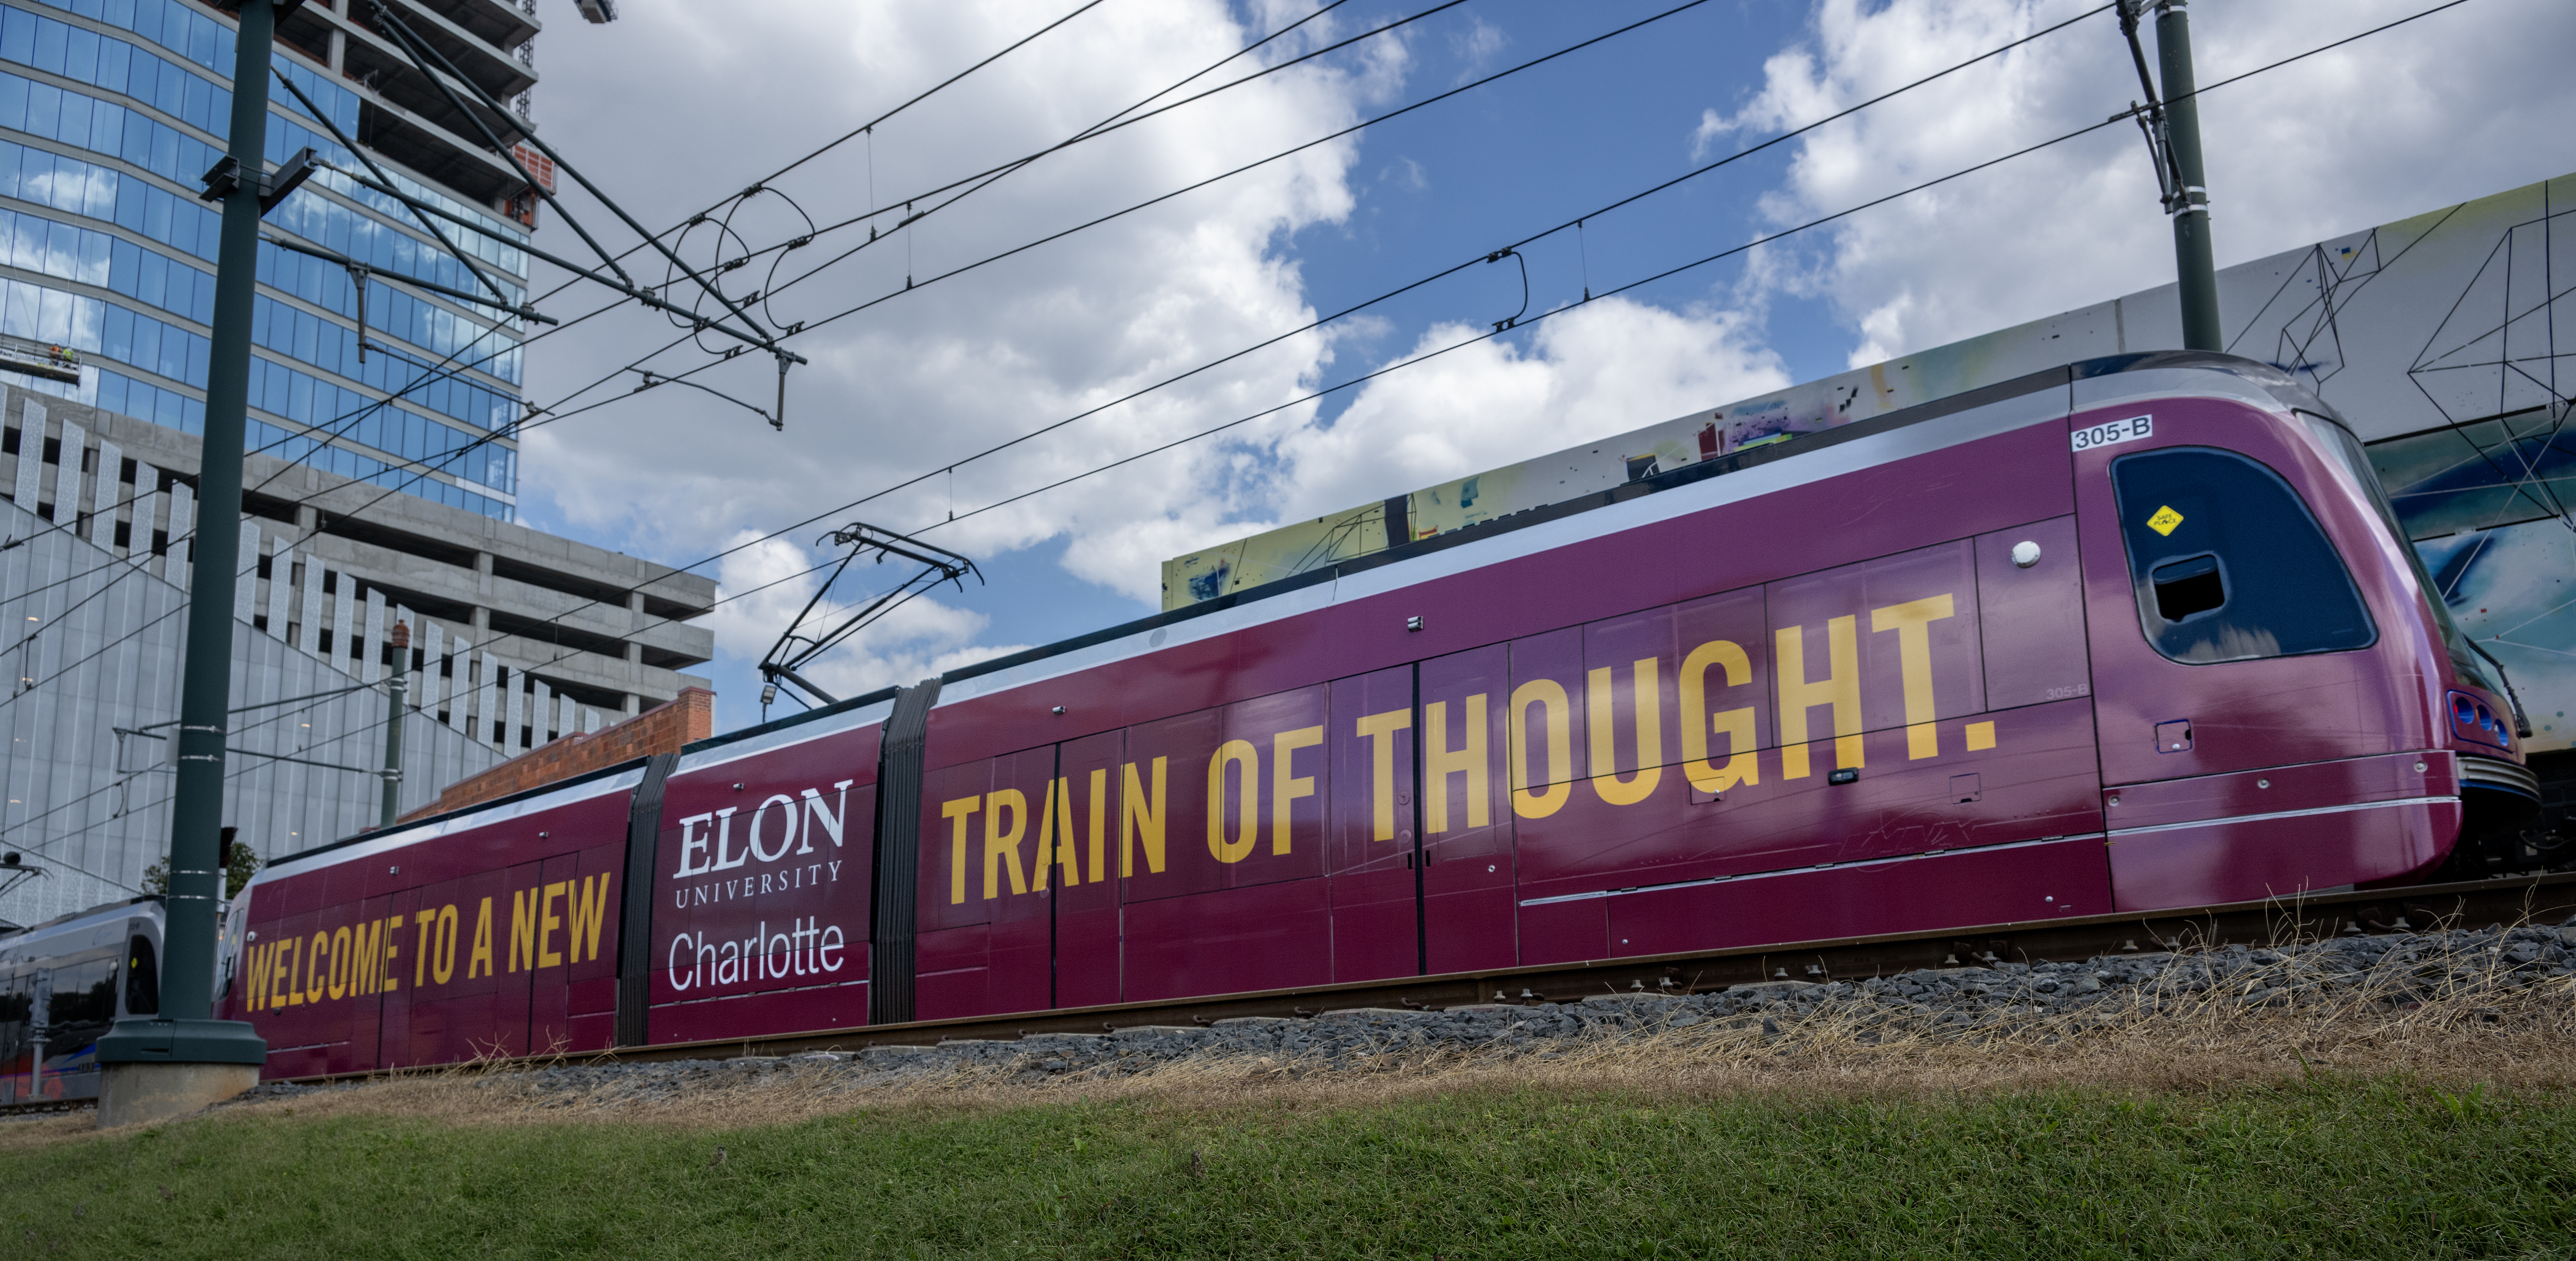 Charlotte light rail with "A train of thought" on side